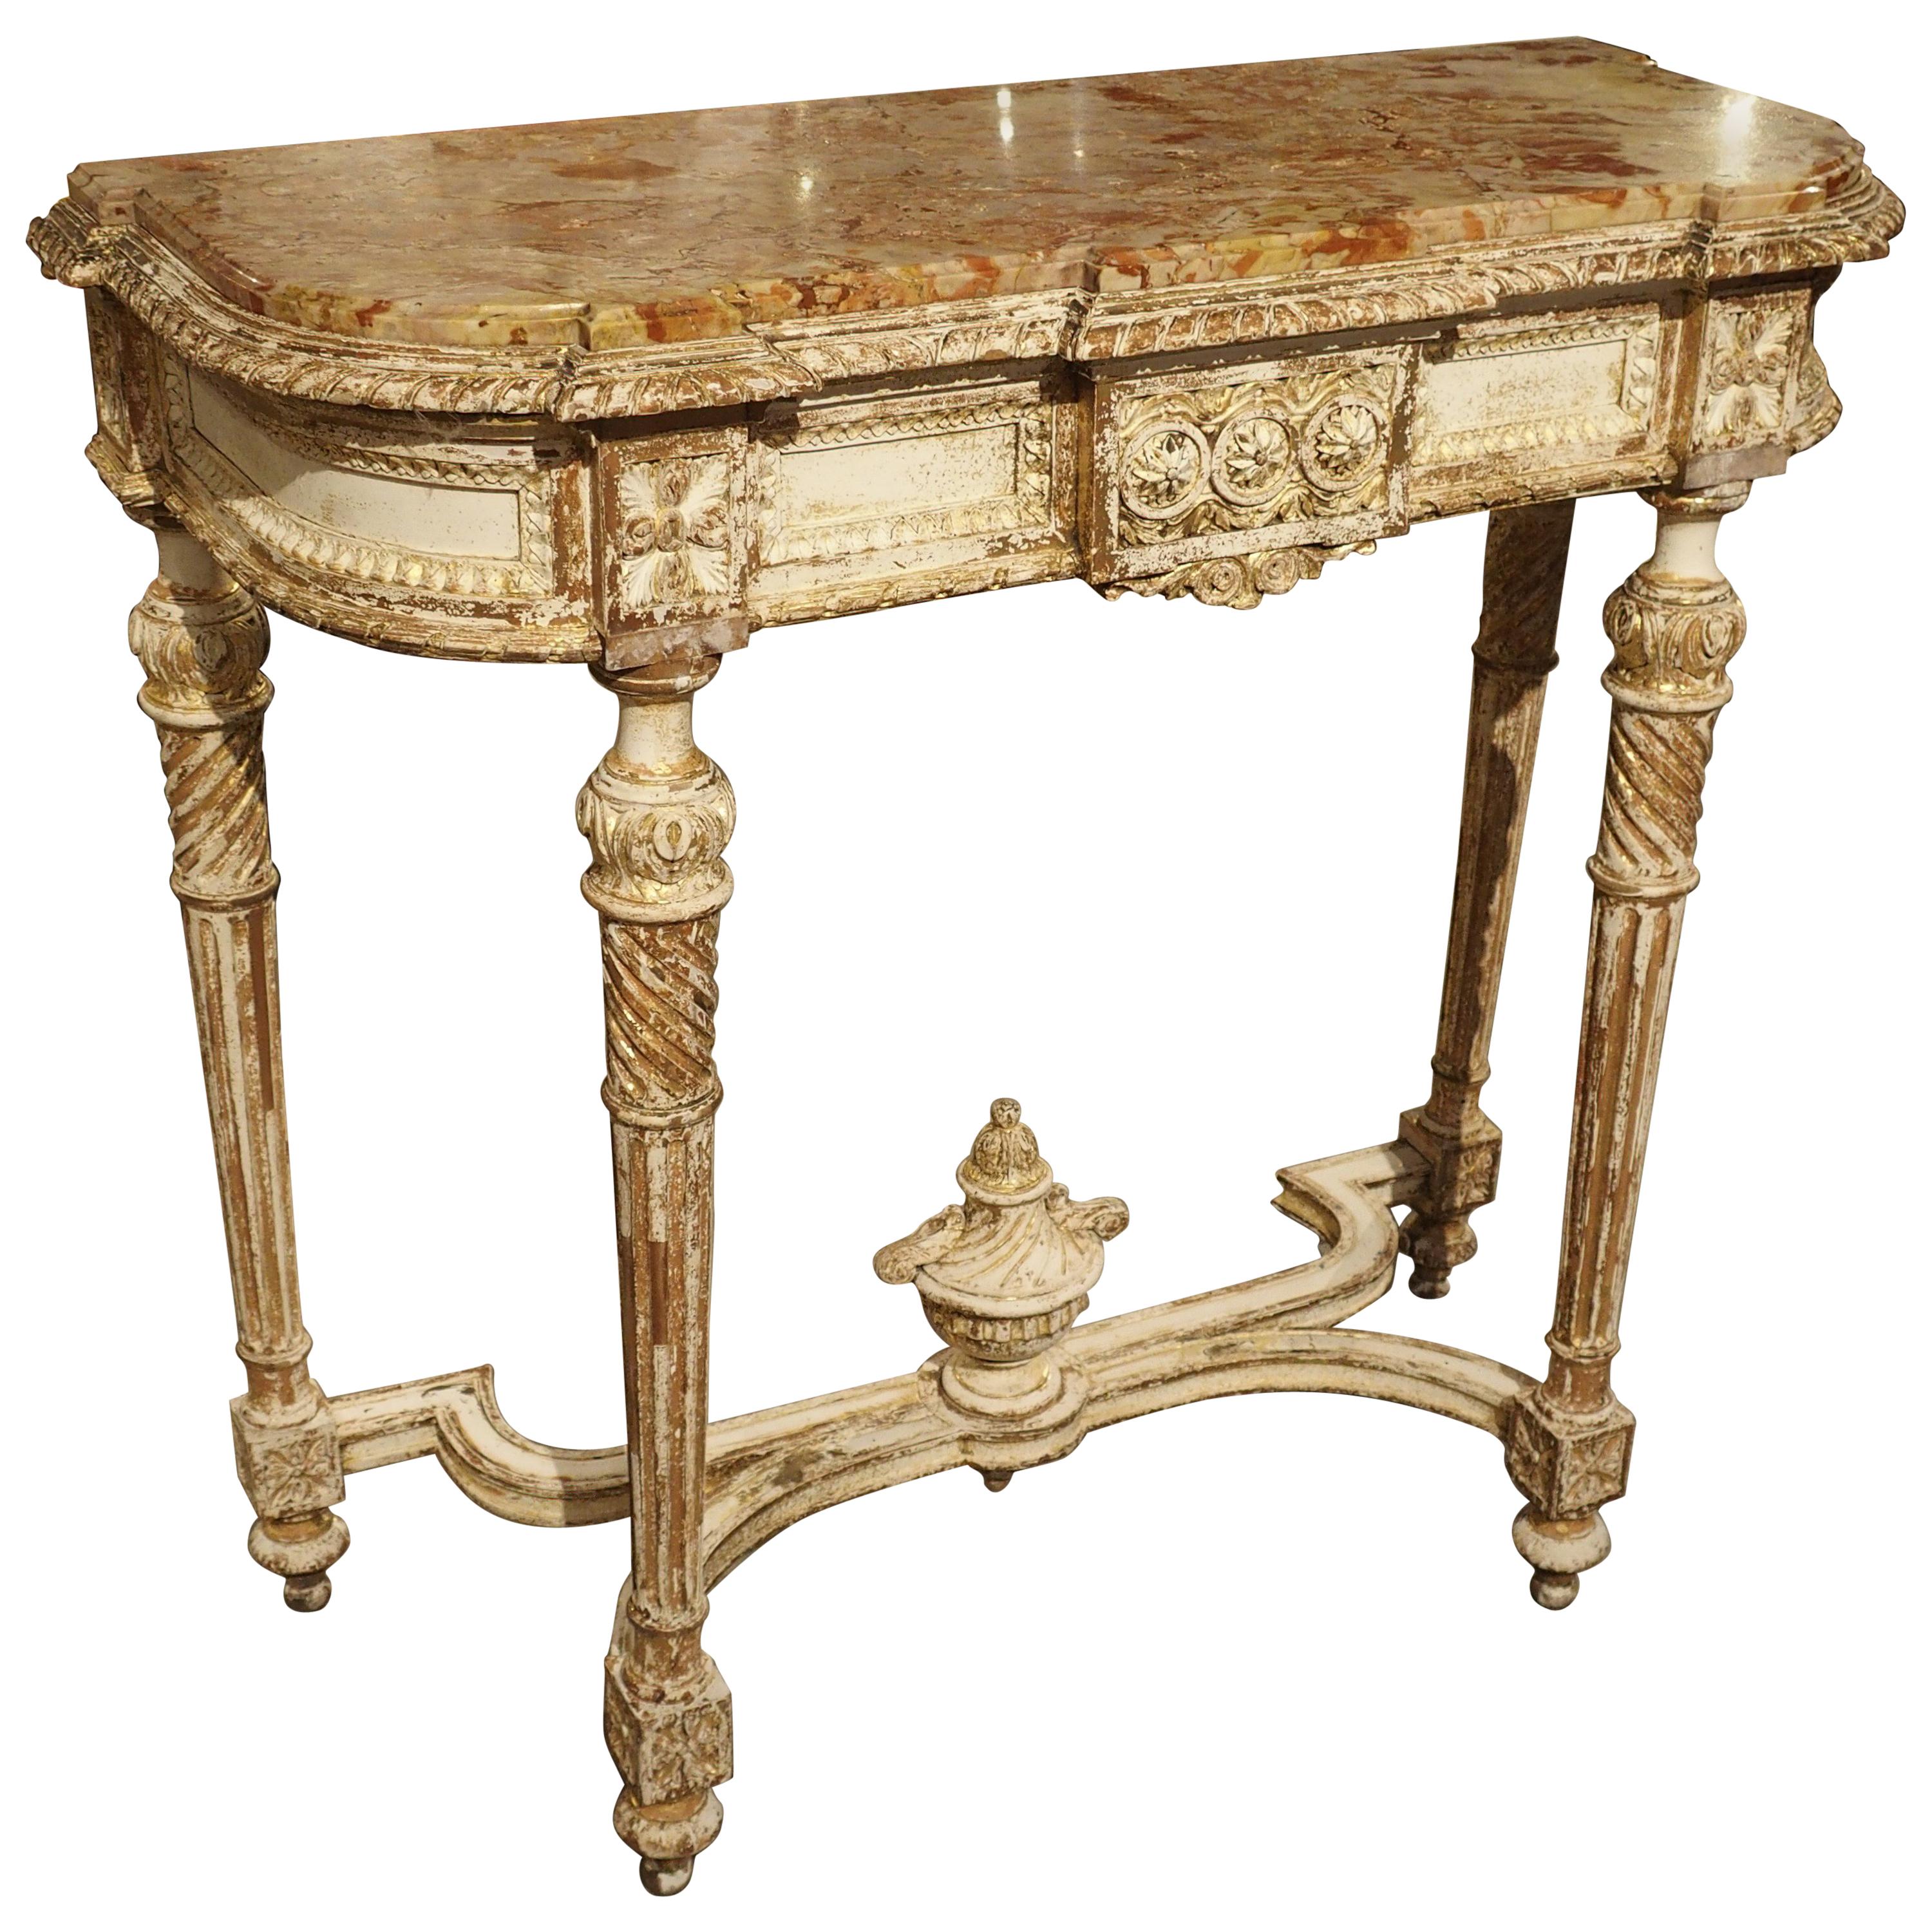 Antique Louis XVI Style Parcel Paint Console Table from France, circa 1870